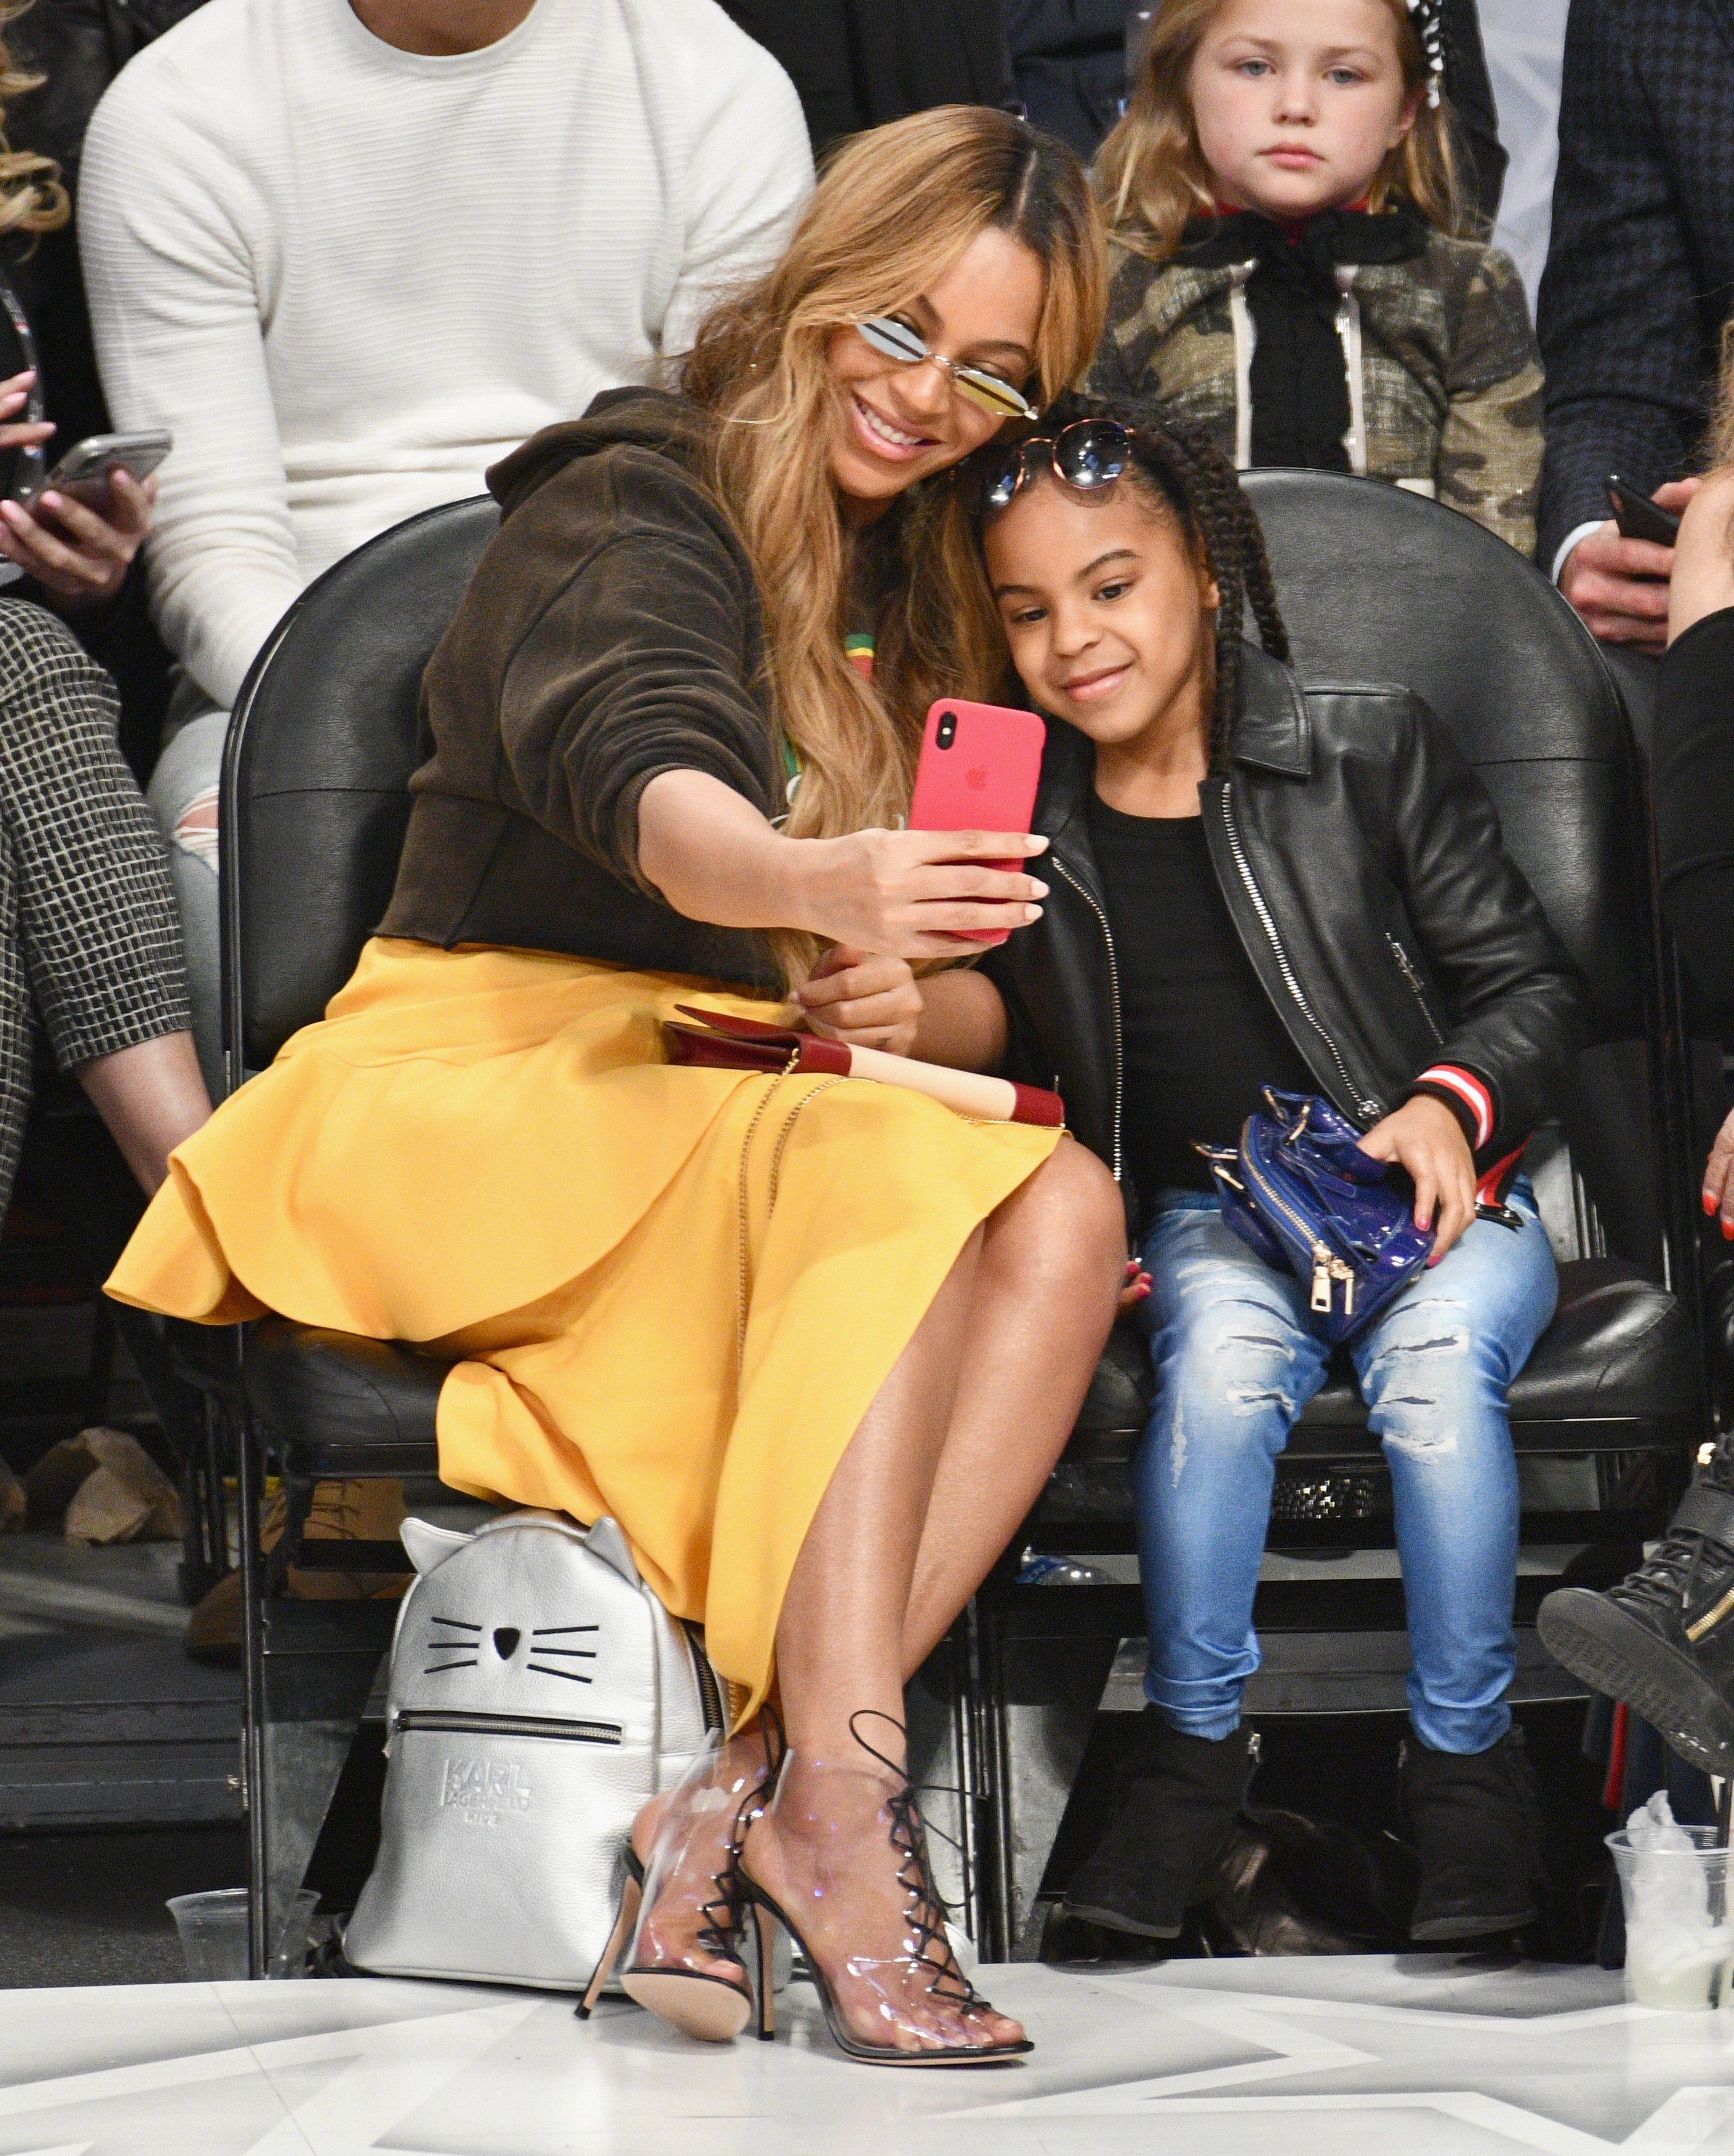 Beyoncé and Blue Ivy Carter attend the NBA All-Star Game at Staples Center on Feb. 18, 2018, in Los Angeles.